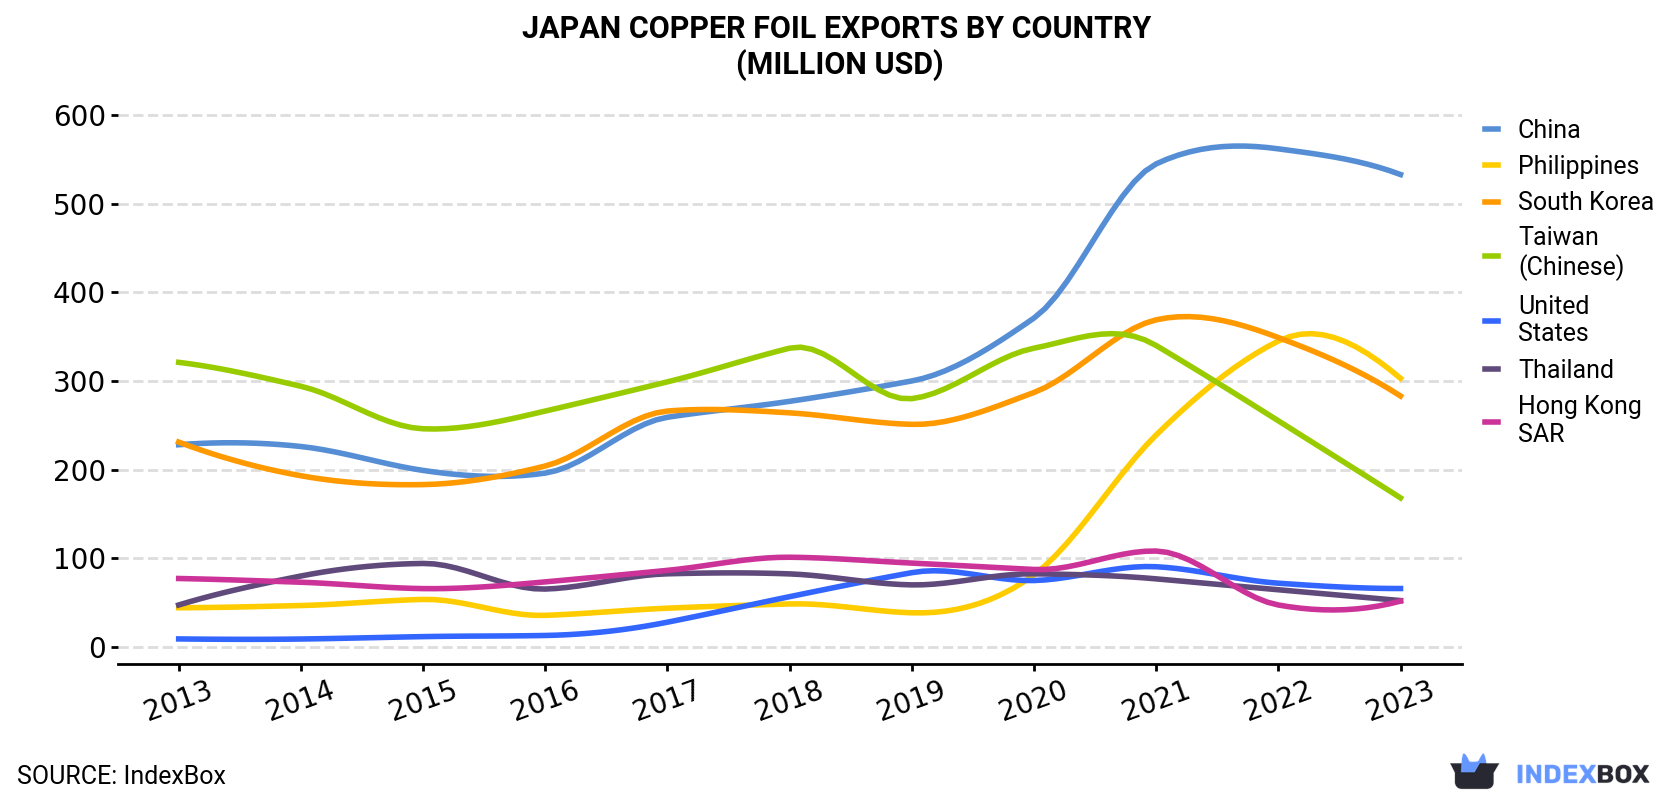 Japan Copper Foil Exports By Country (Million USD)